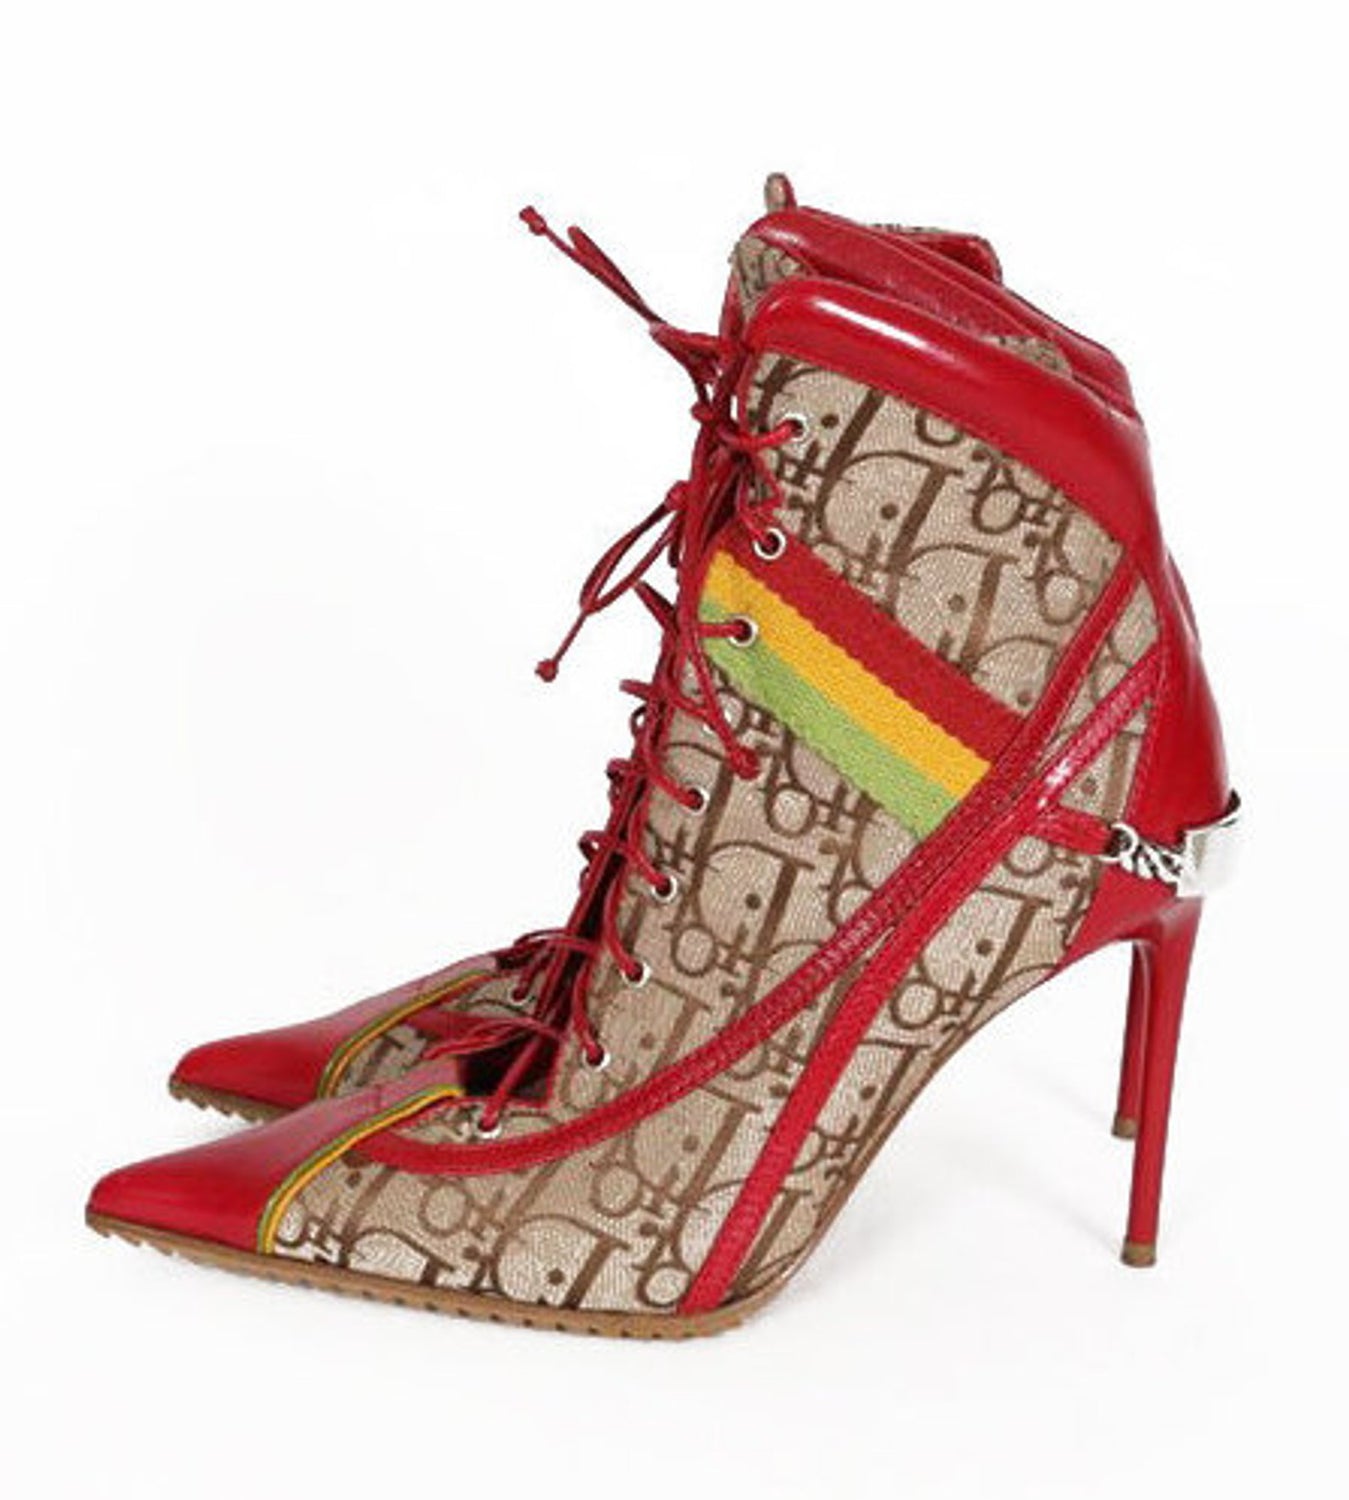 Fruit Vintage Christian Dior Rasta ankle boots, trotter monogram logo booties. Designed by John Galliano, they feature oblique logo print, lace up closure with leather laces, red leather trim and a large silver logo plate at rear.